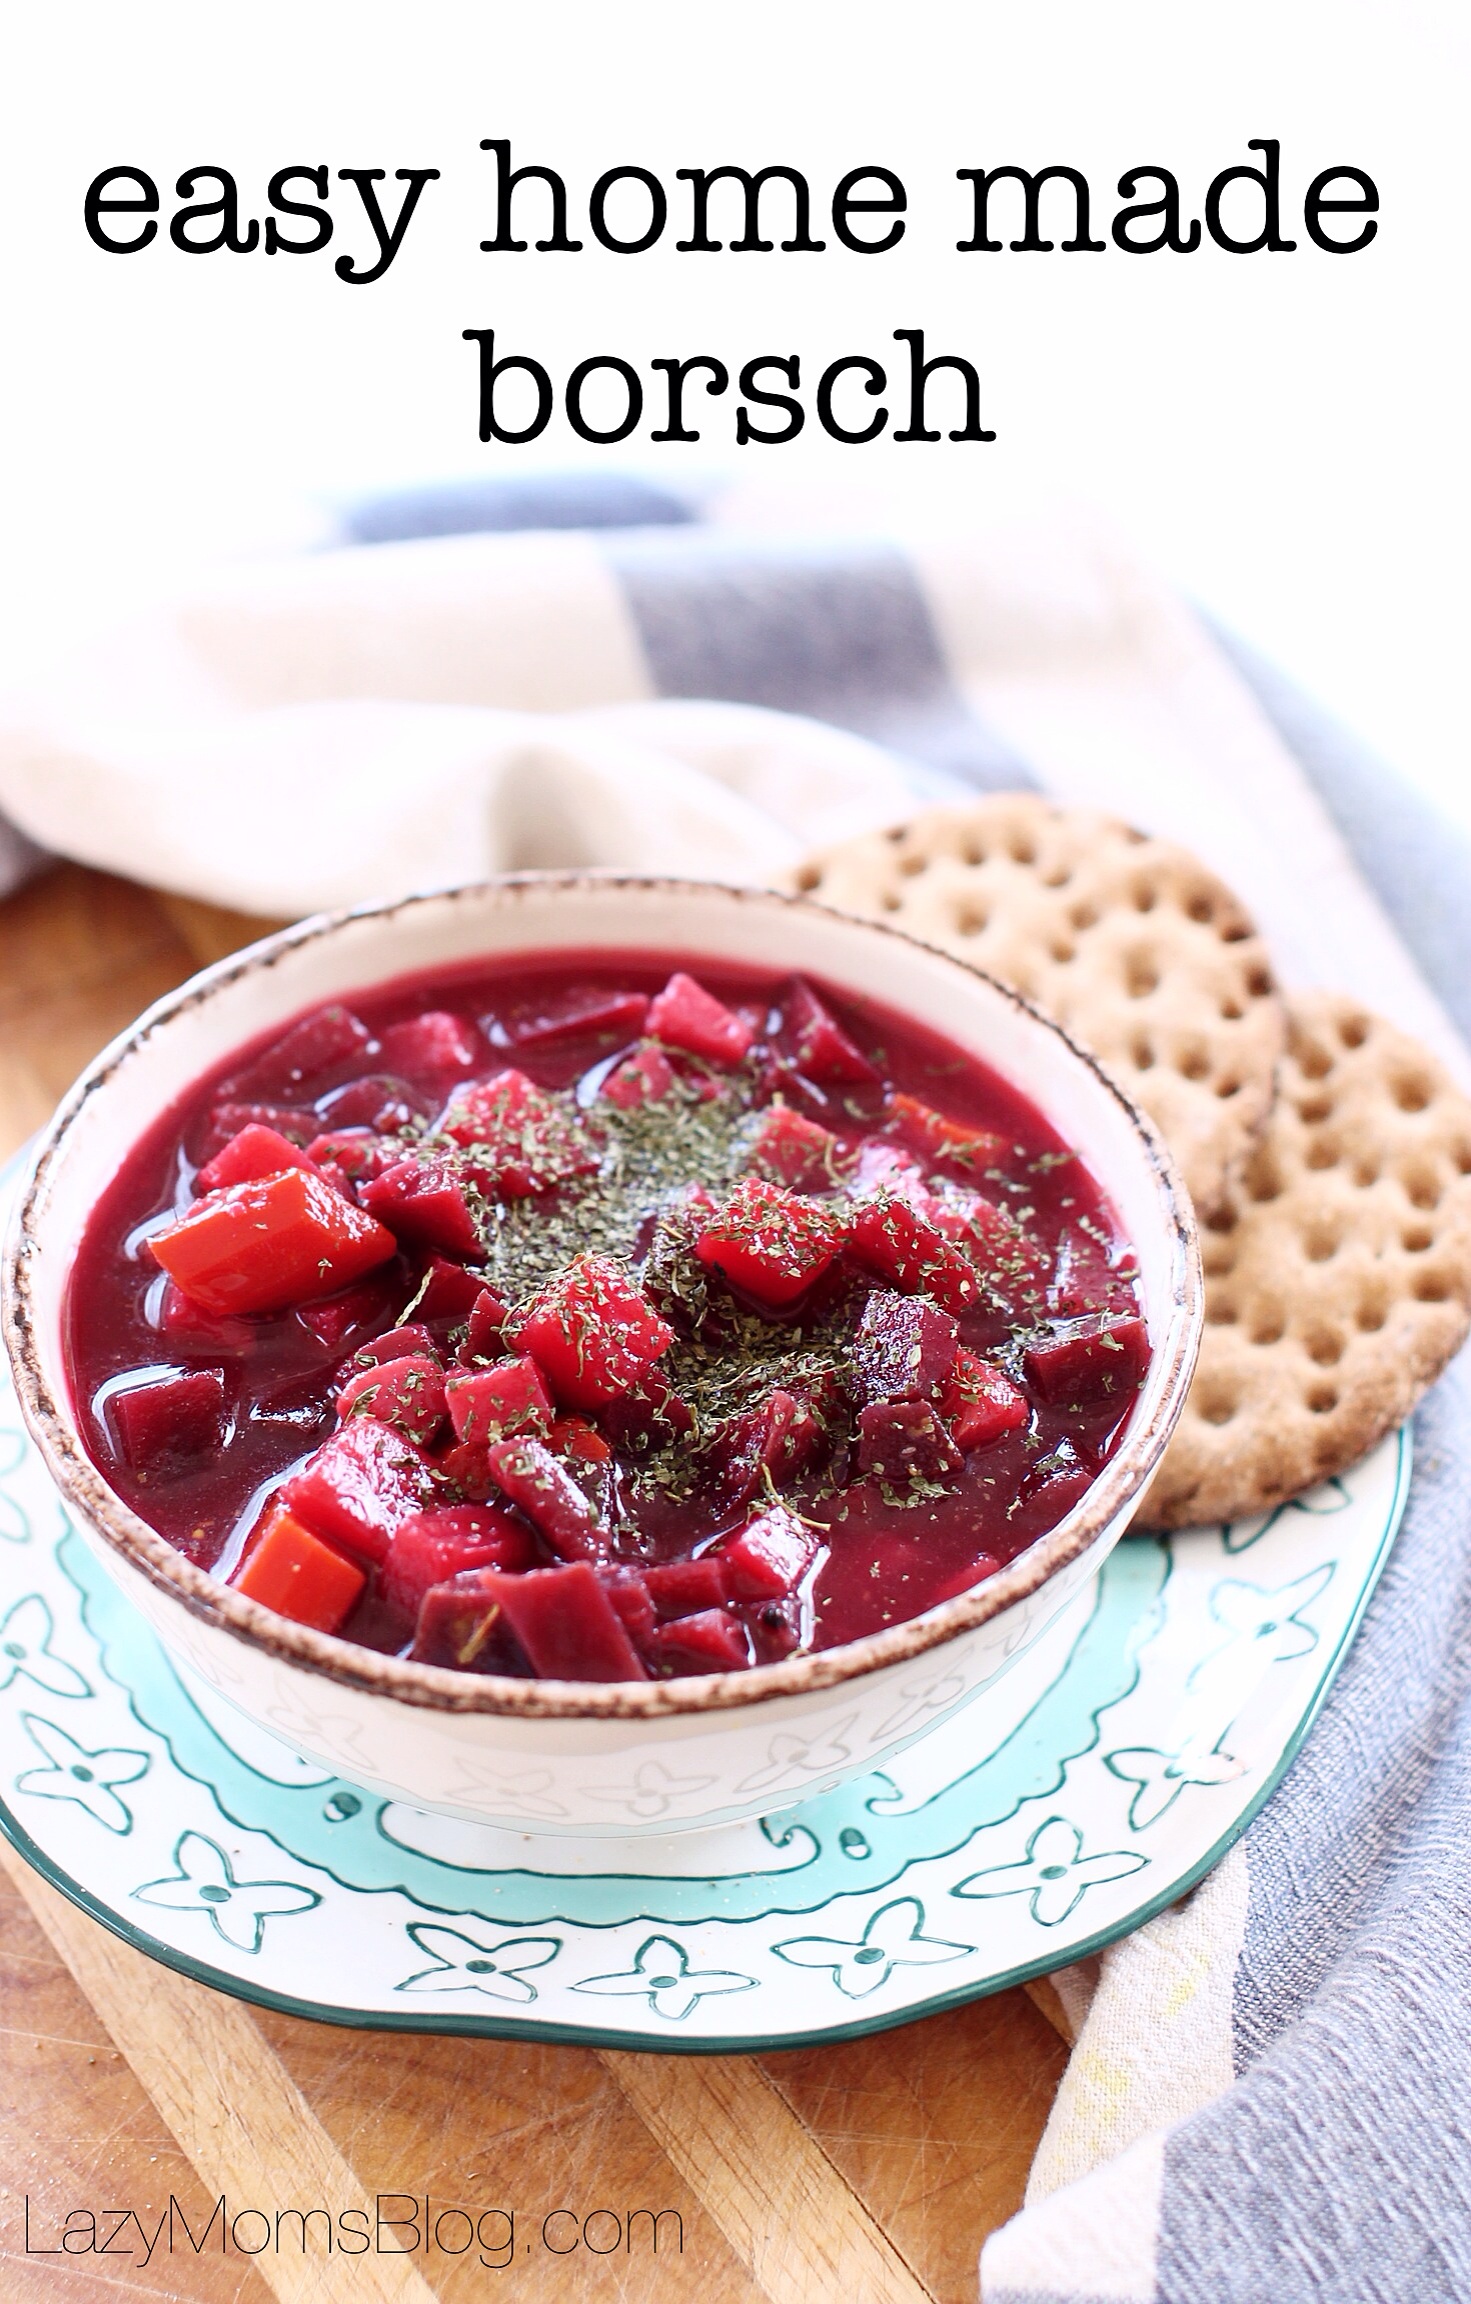 This is the best home-made borsch I ever had, and so easy to make!